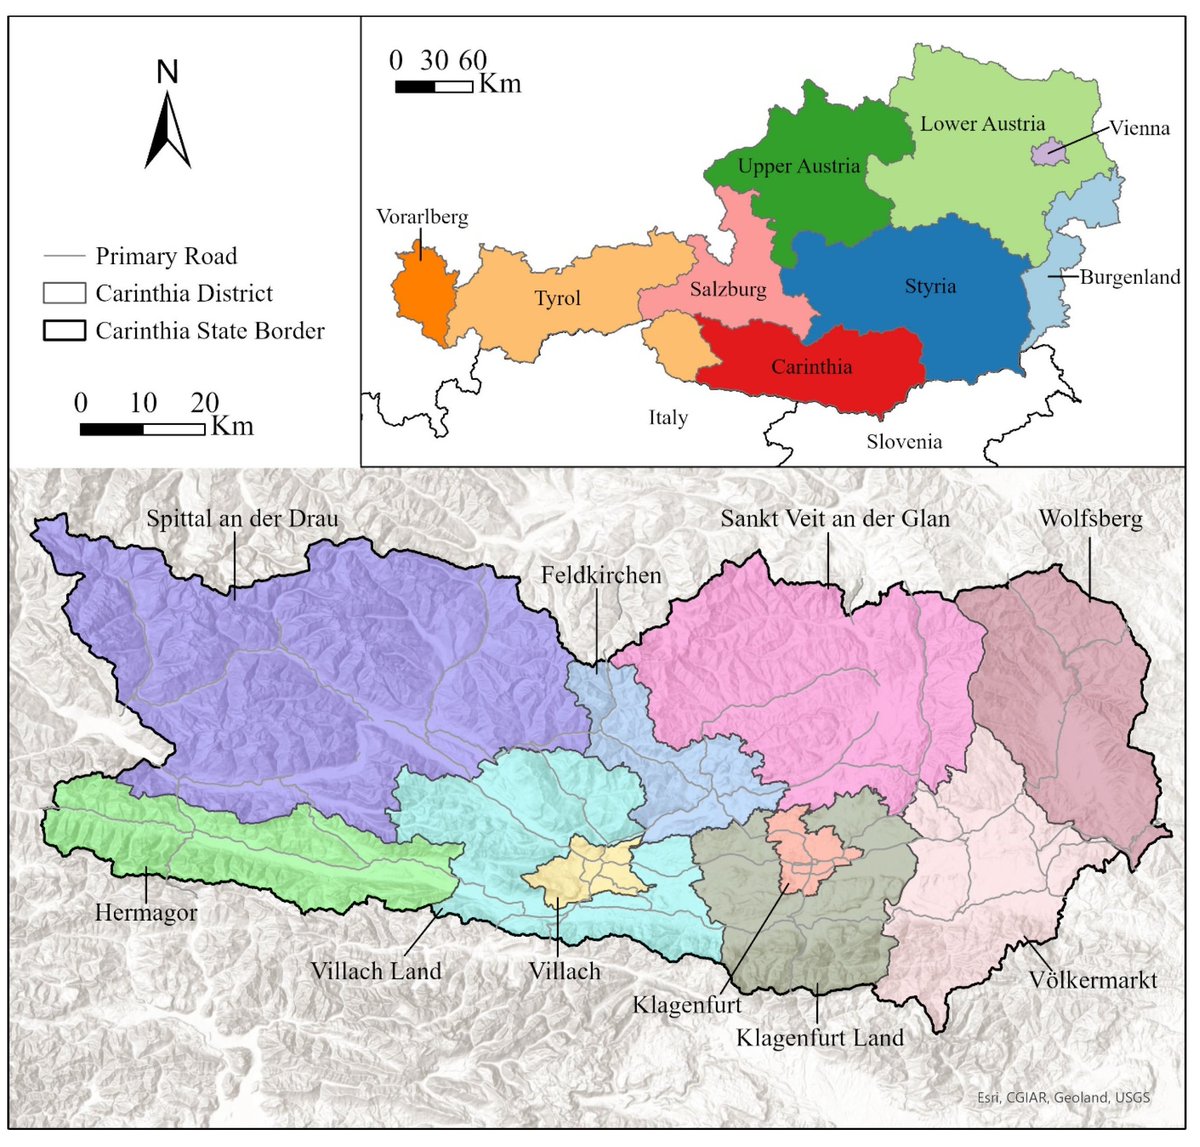 💫Led by Dr. @changzhen_wang, the paper examines multiscale #spatial accessibility to acute hospitals in Carinthia, Austria. 
Free access at mdpi.com/2220-9964/12/1…